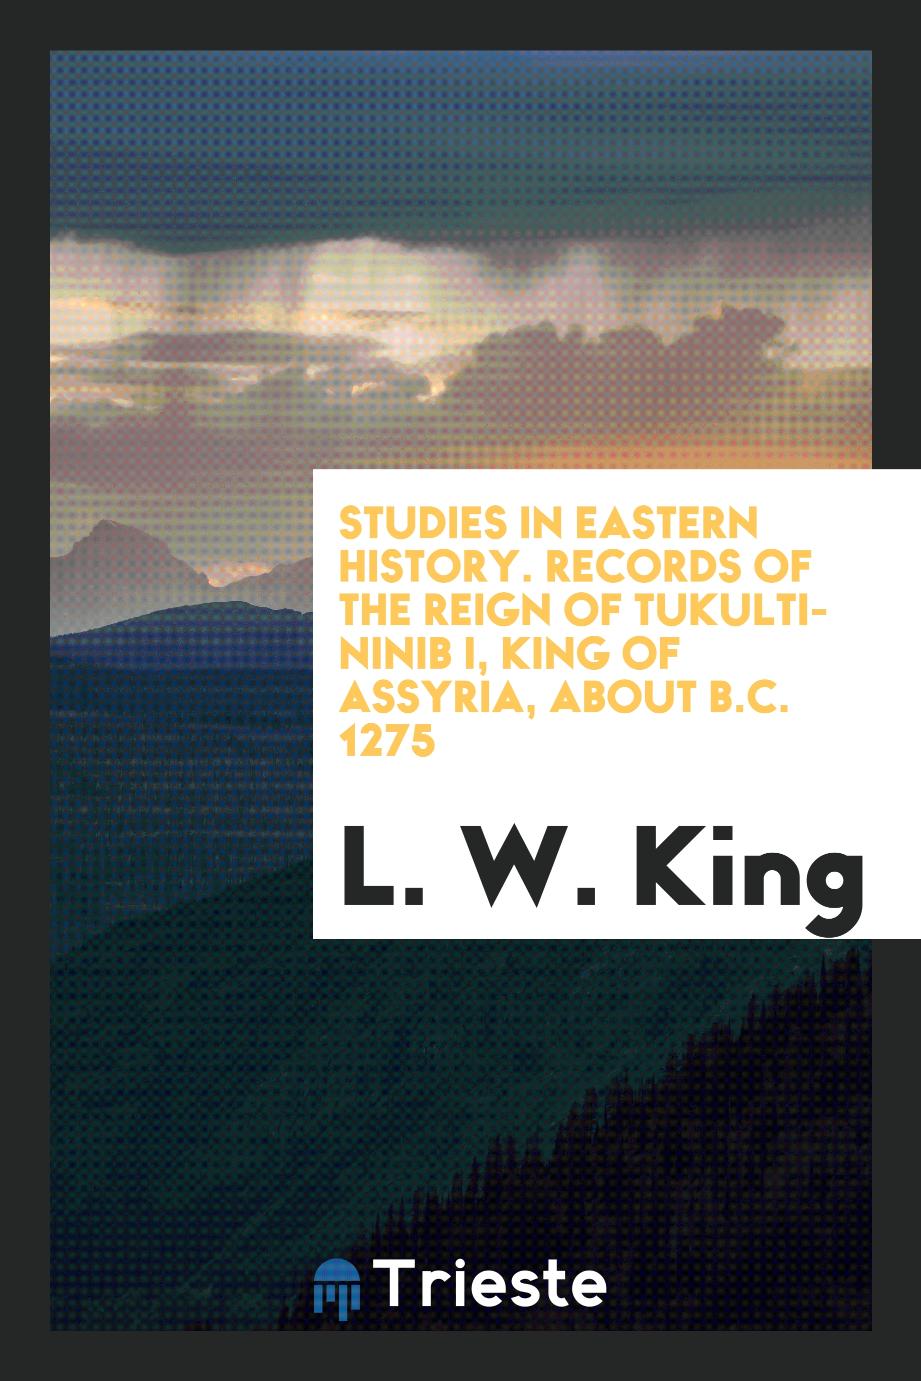 Studies in Eastern History. Records of the reign of Tukulti-Ninib I, King of Assyria, about B.C. 1275